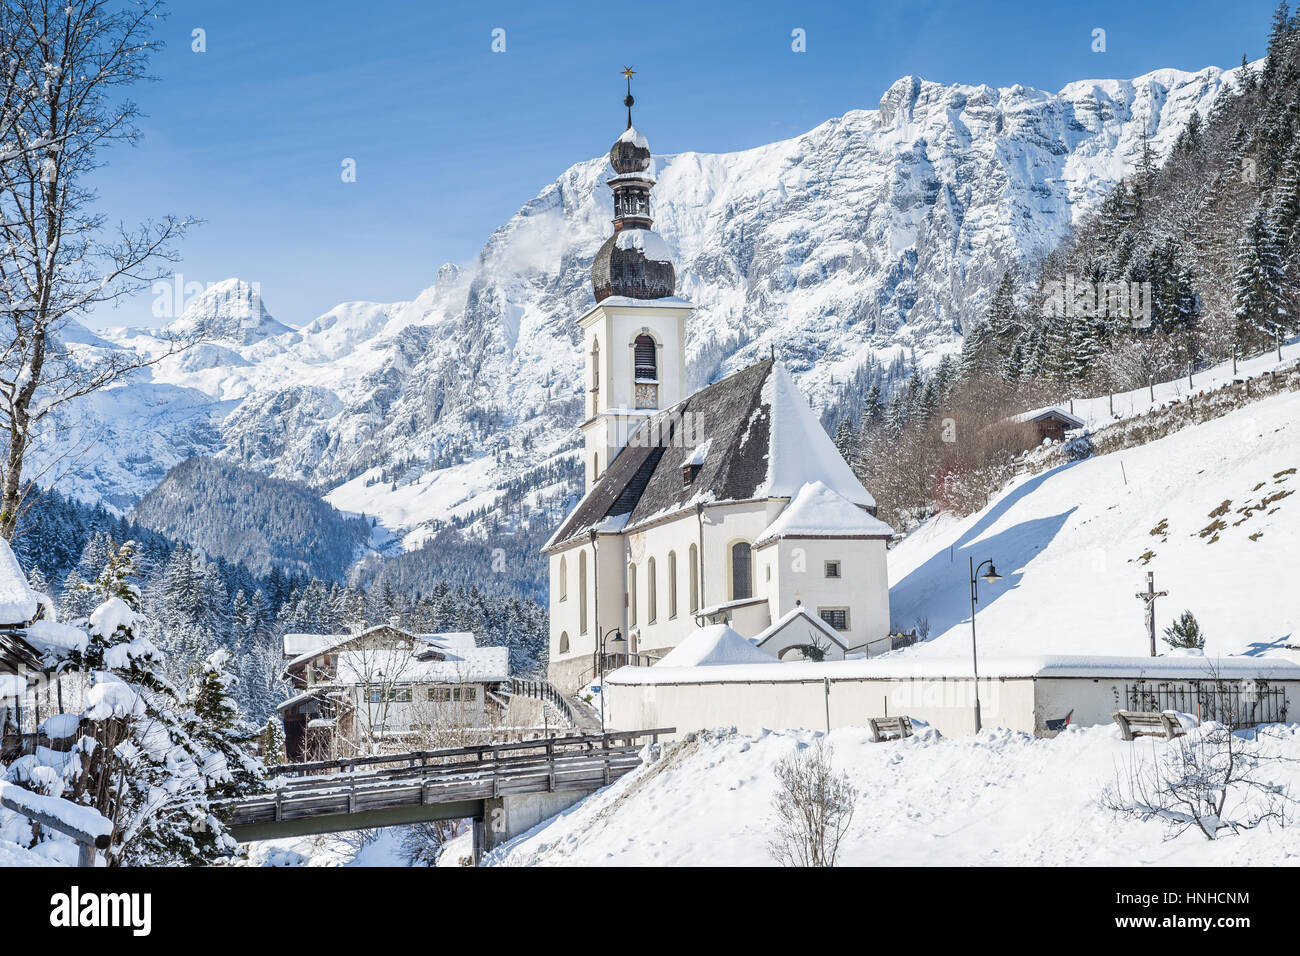 Classic view of famous Parish Church of St. Sebastian embedded in scenic winter wonderland landscape in the Alps, village of Ramsau, Bavaria, Germany Stock Photo